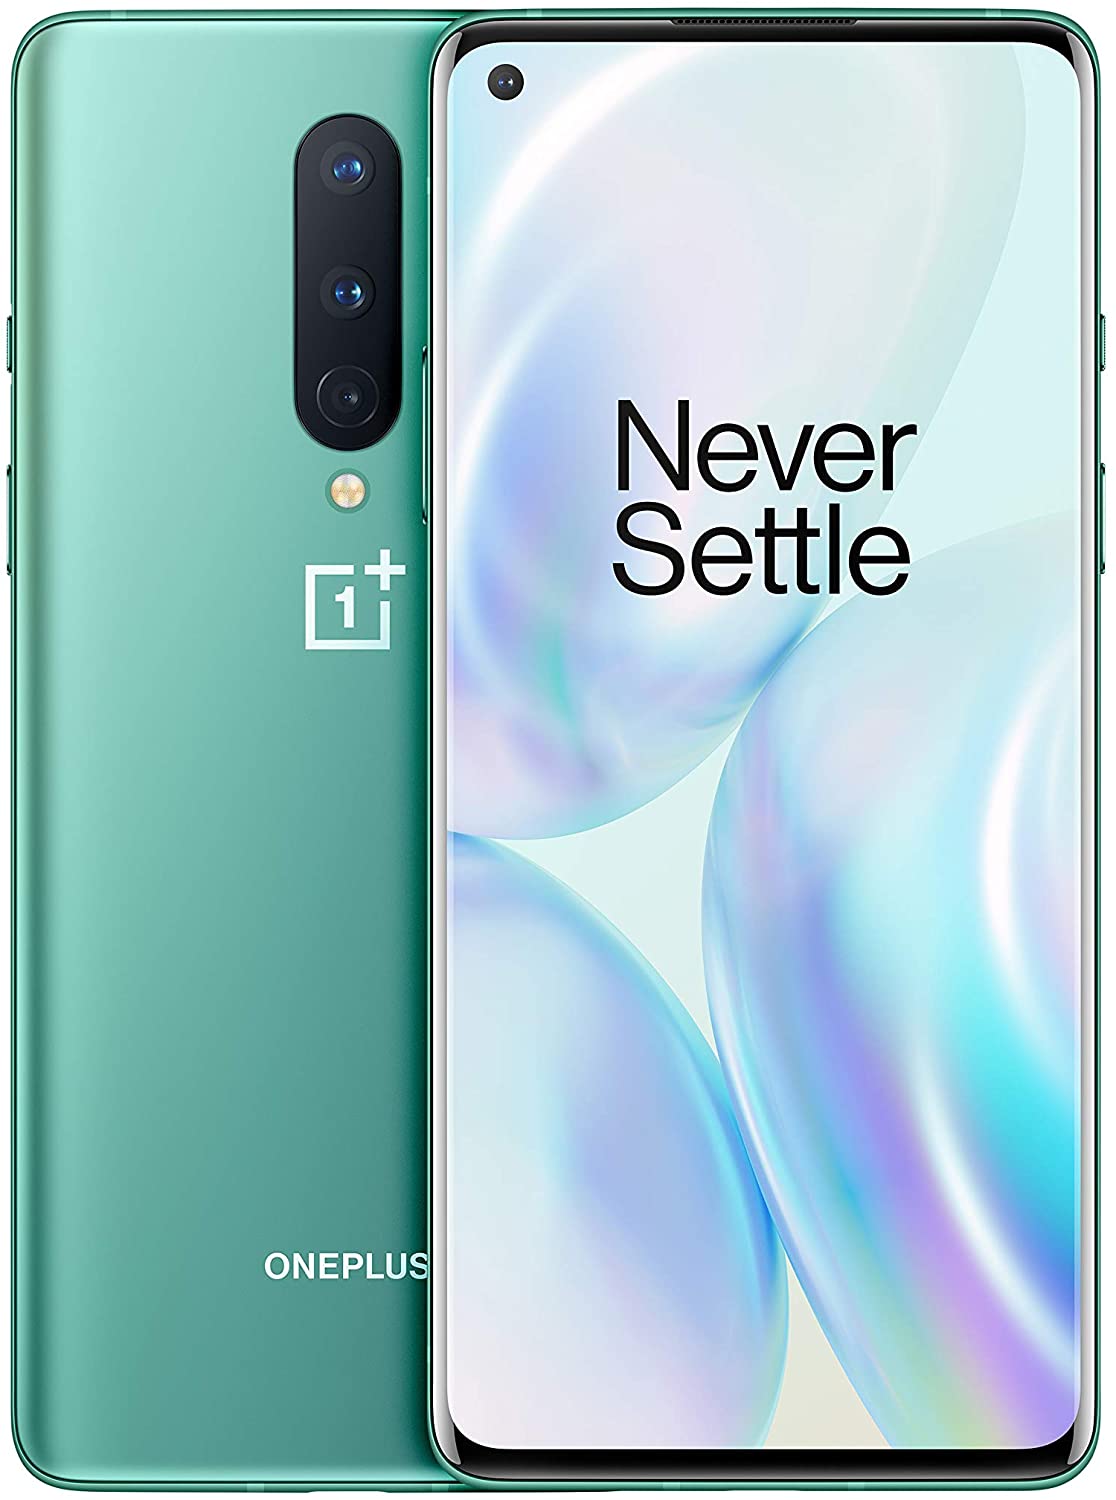 oneplus 8 5g 12gb ram 256gb uk sim-free smartphone with triple camera, dual sim and alexa built-in glacial green - 2 years warranty, glacial green - a photo